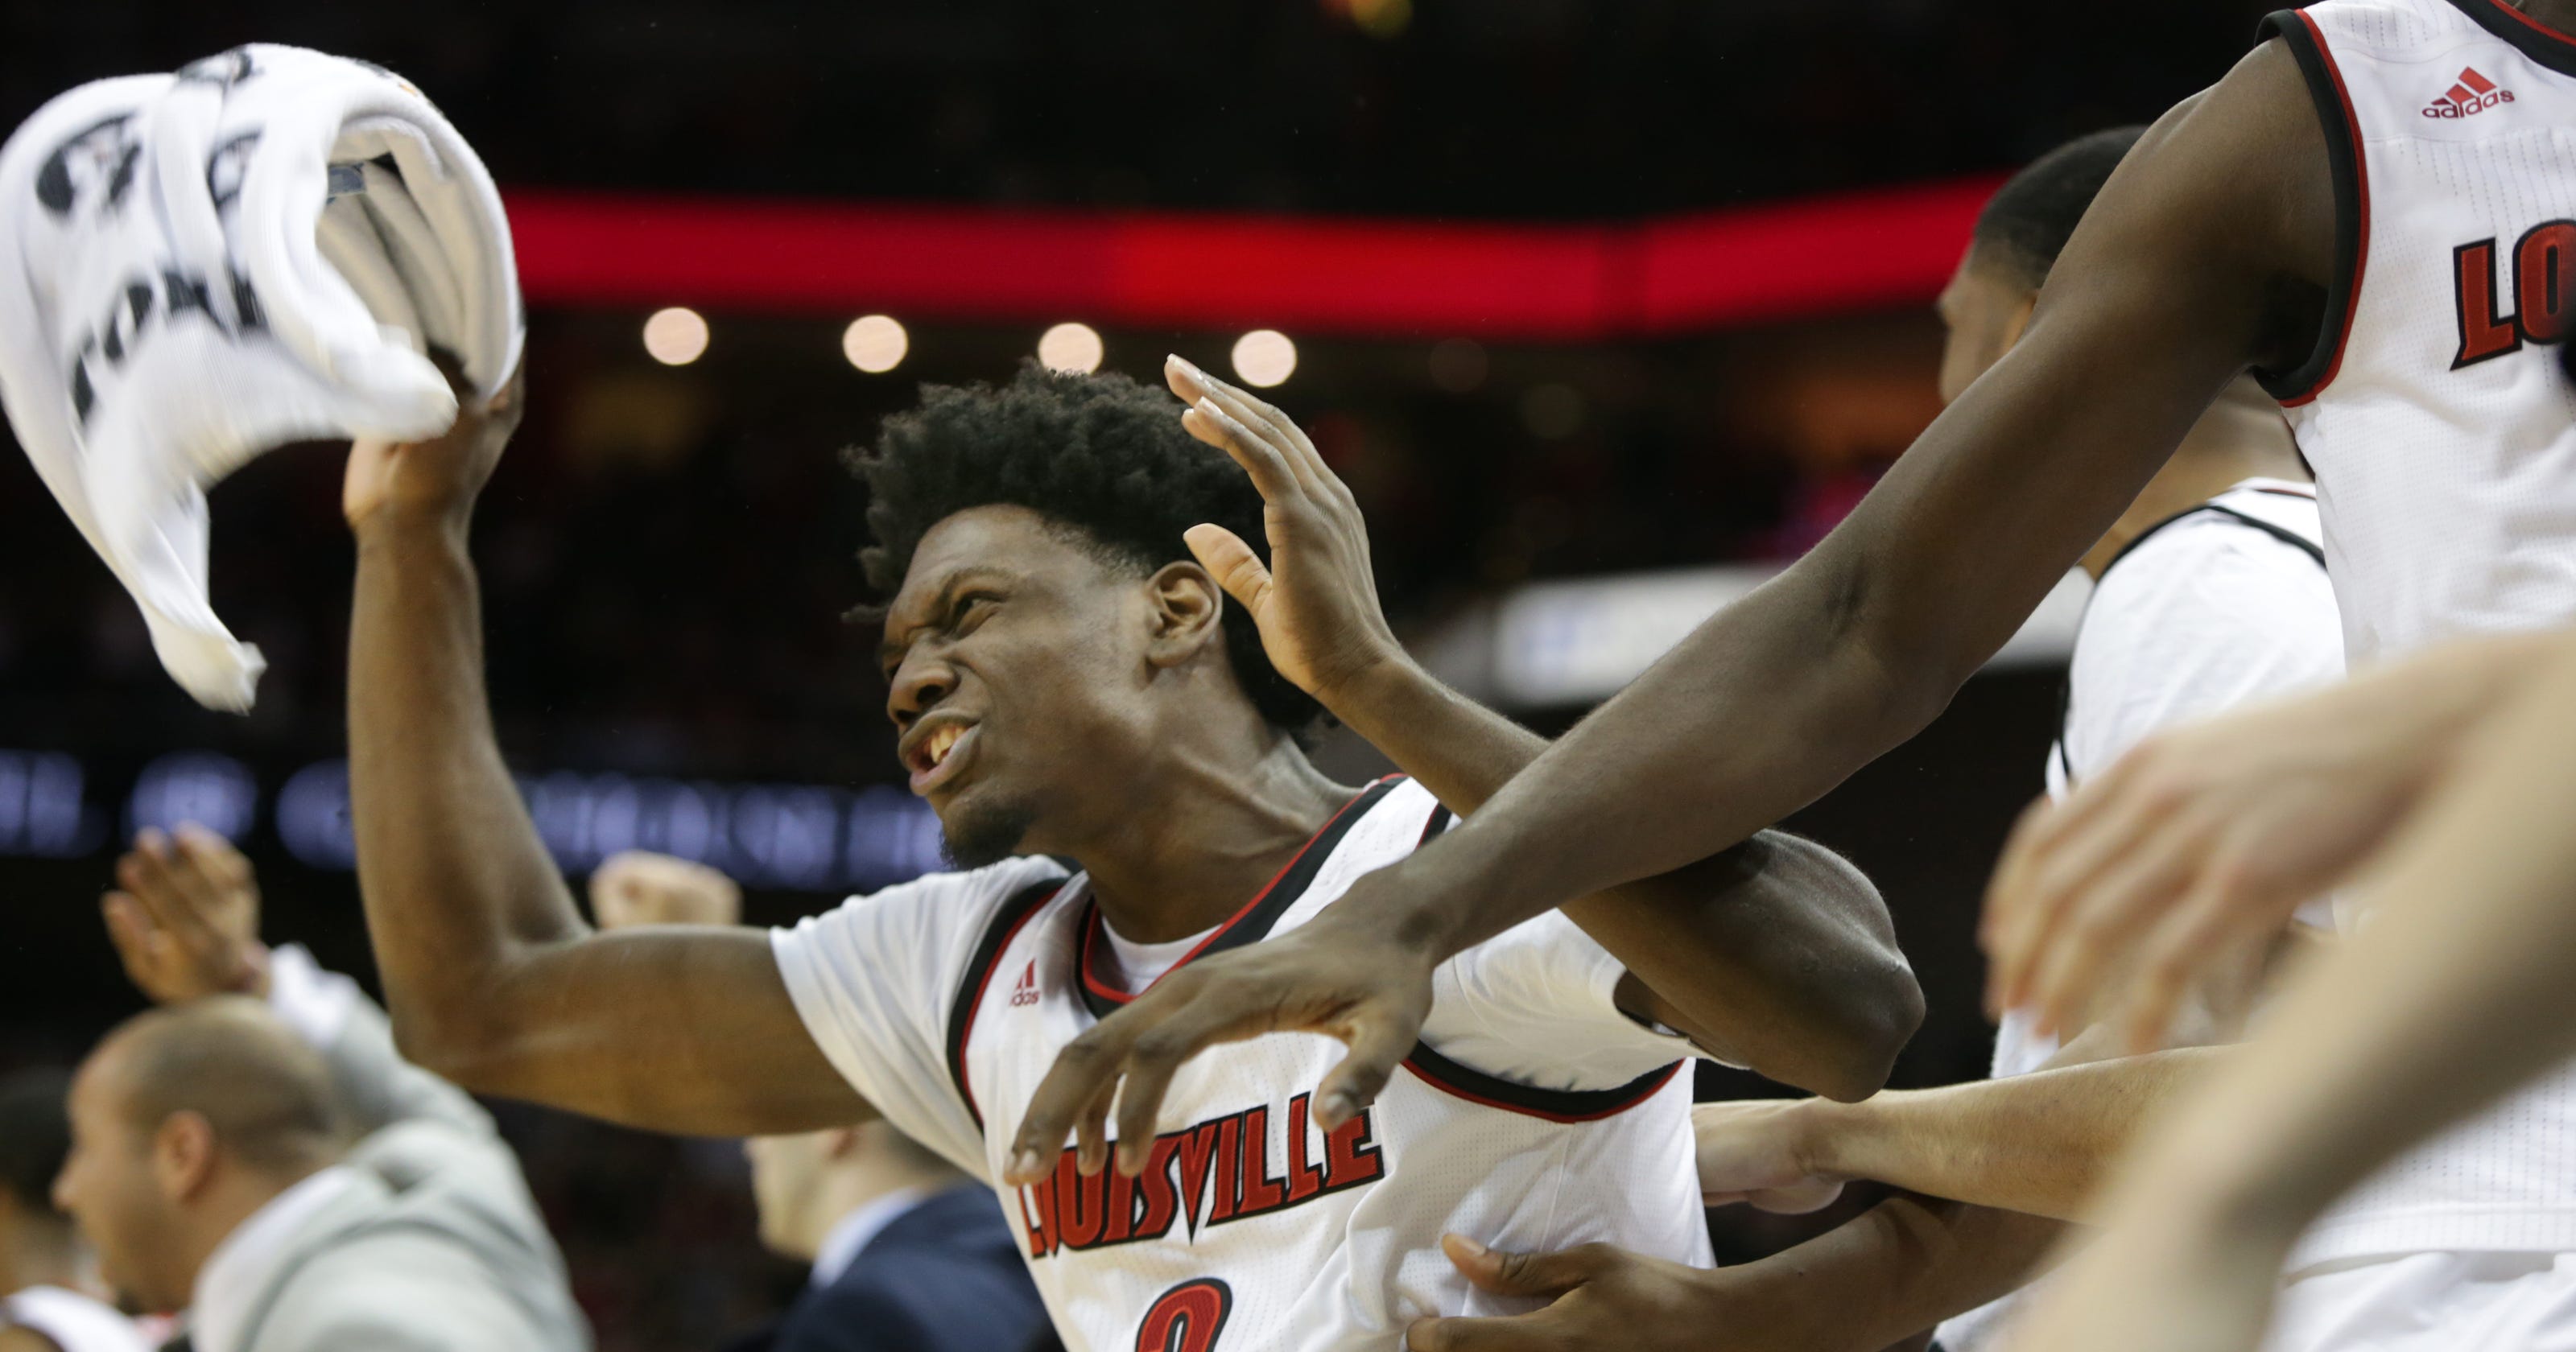 louisville to play tennessee in nit season tip-off opener